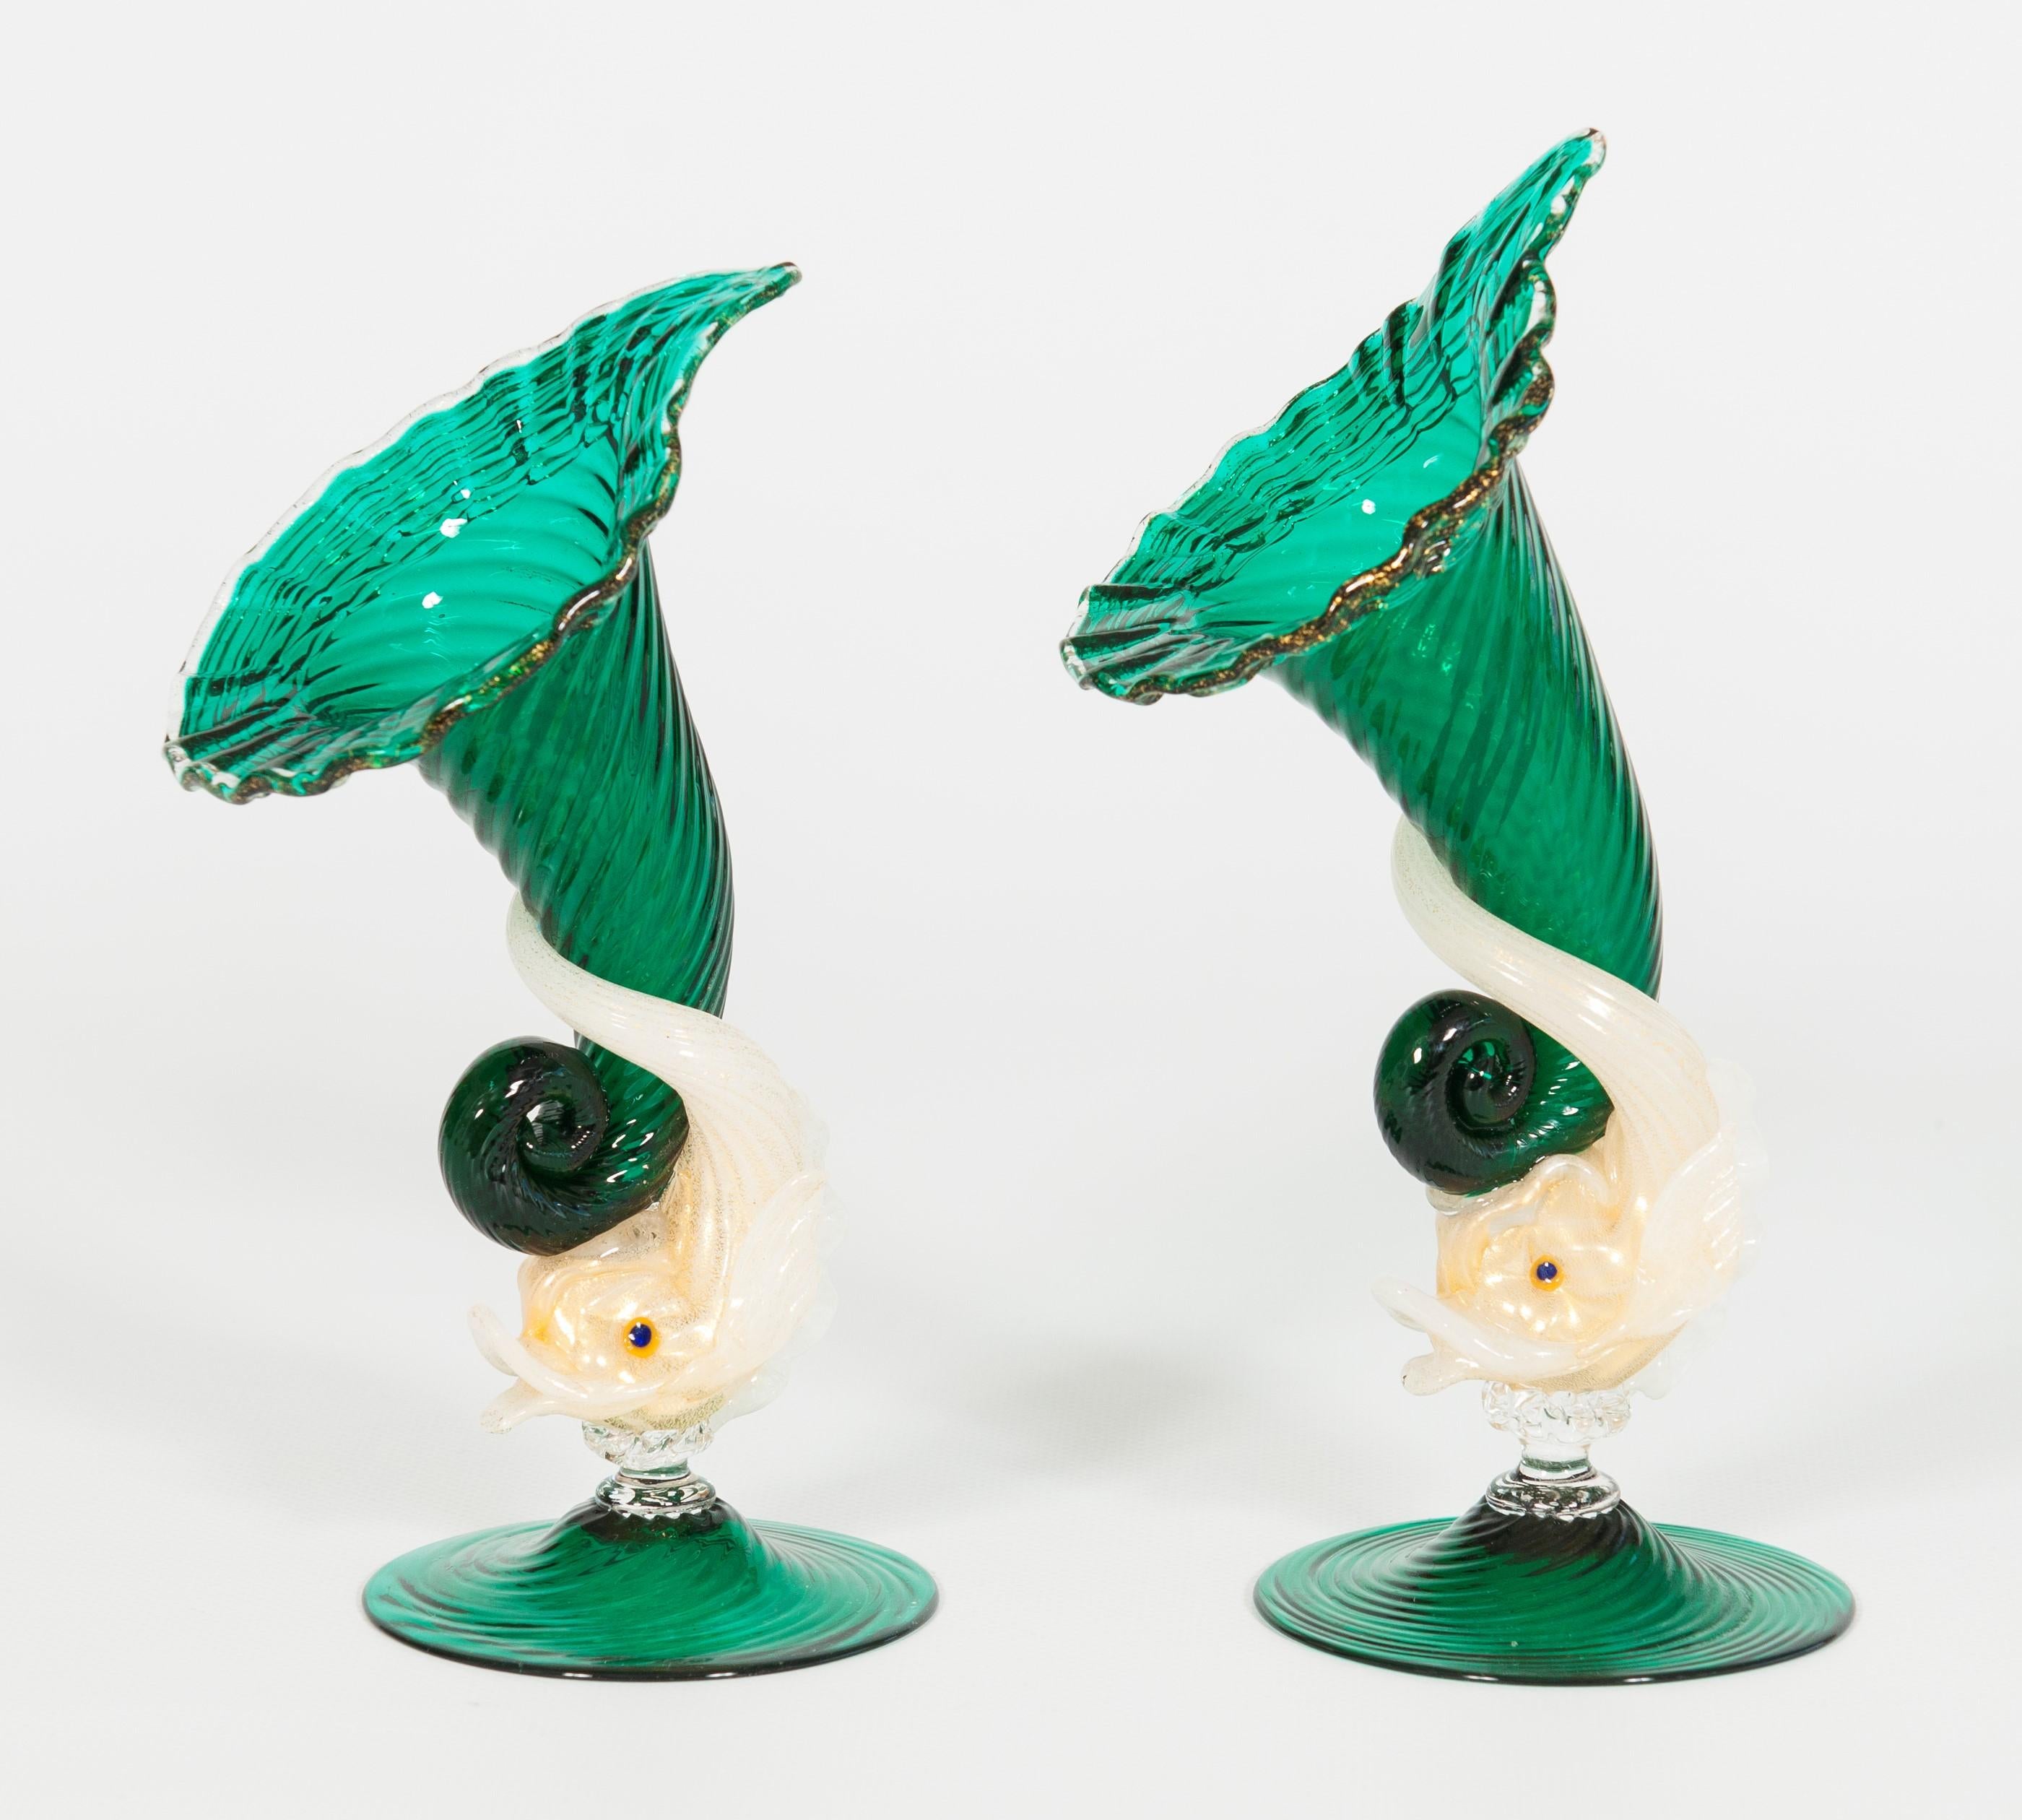 Rare and marvelous pair of green and gold Cornucopia Murano glass cups, Italy, 1960s.
These stunning glasses are composed of an elegant green-colored shell with golden finishes in the upper part, where it opens up, and a silk gold colored dolphin,